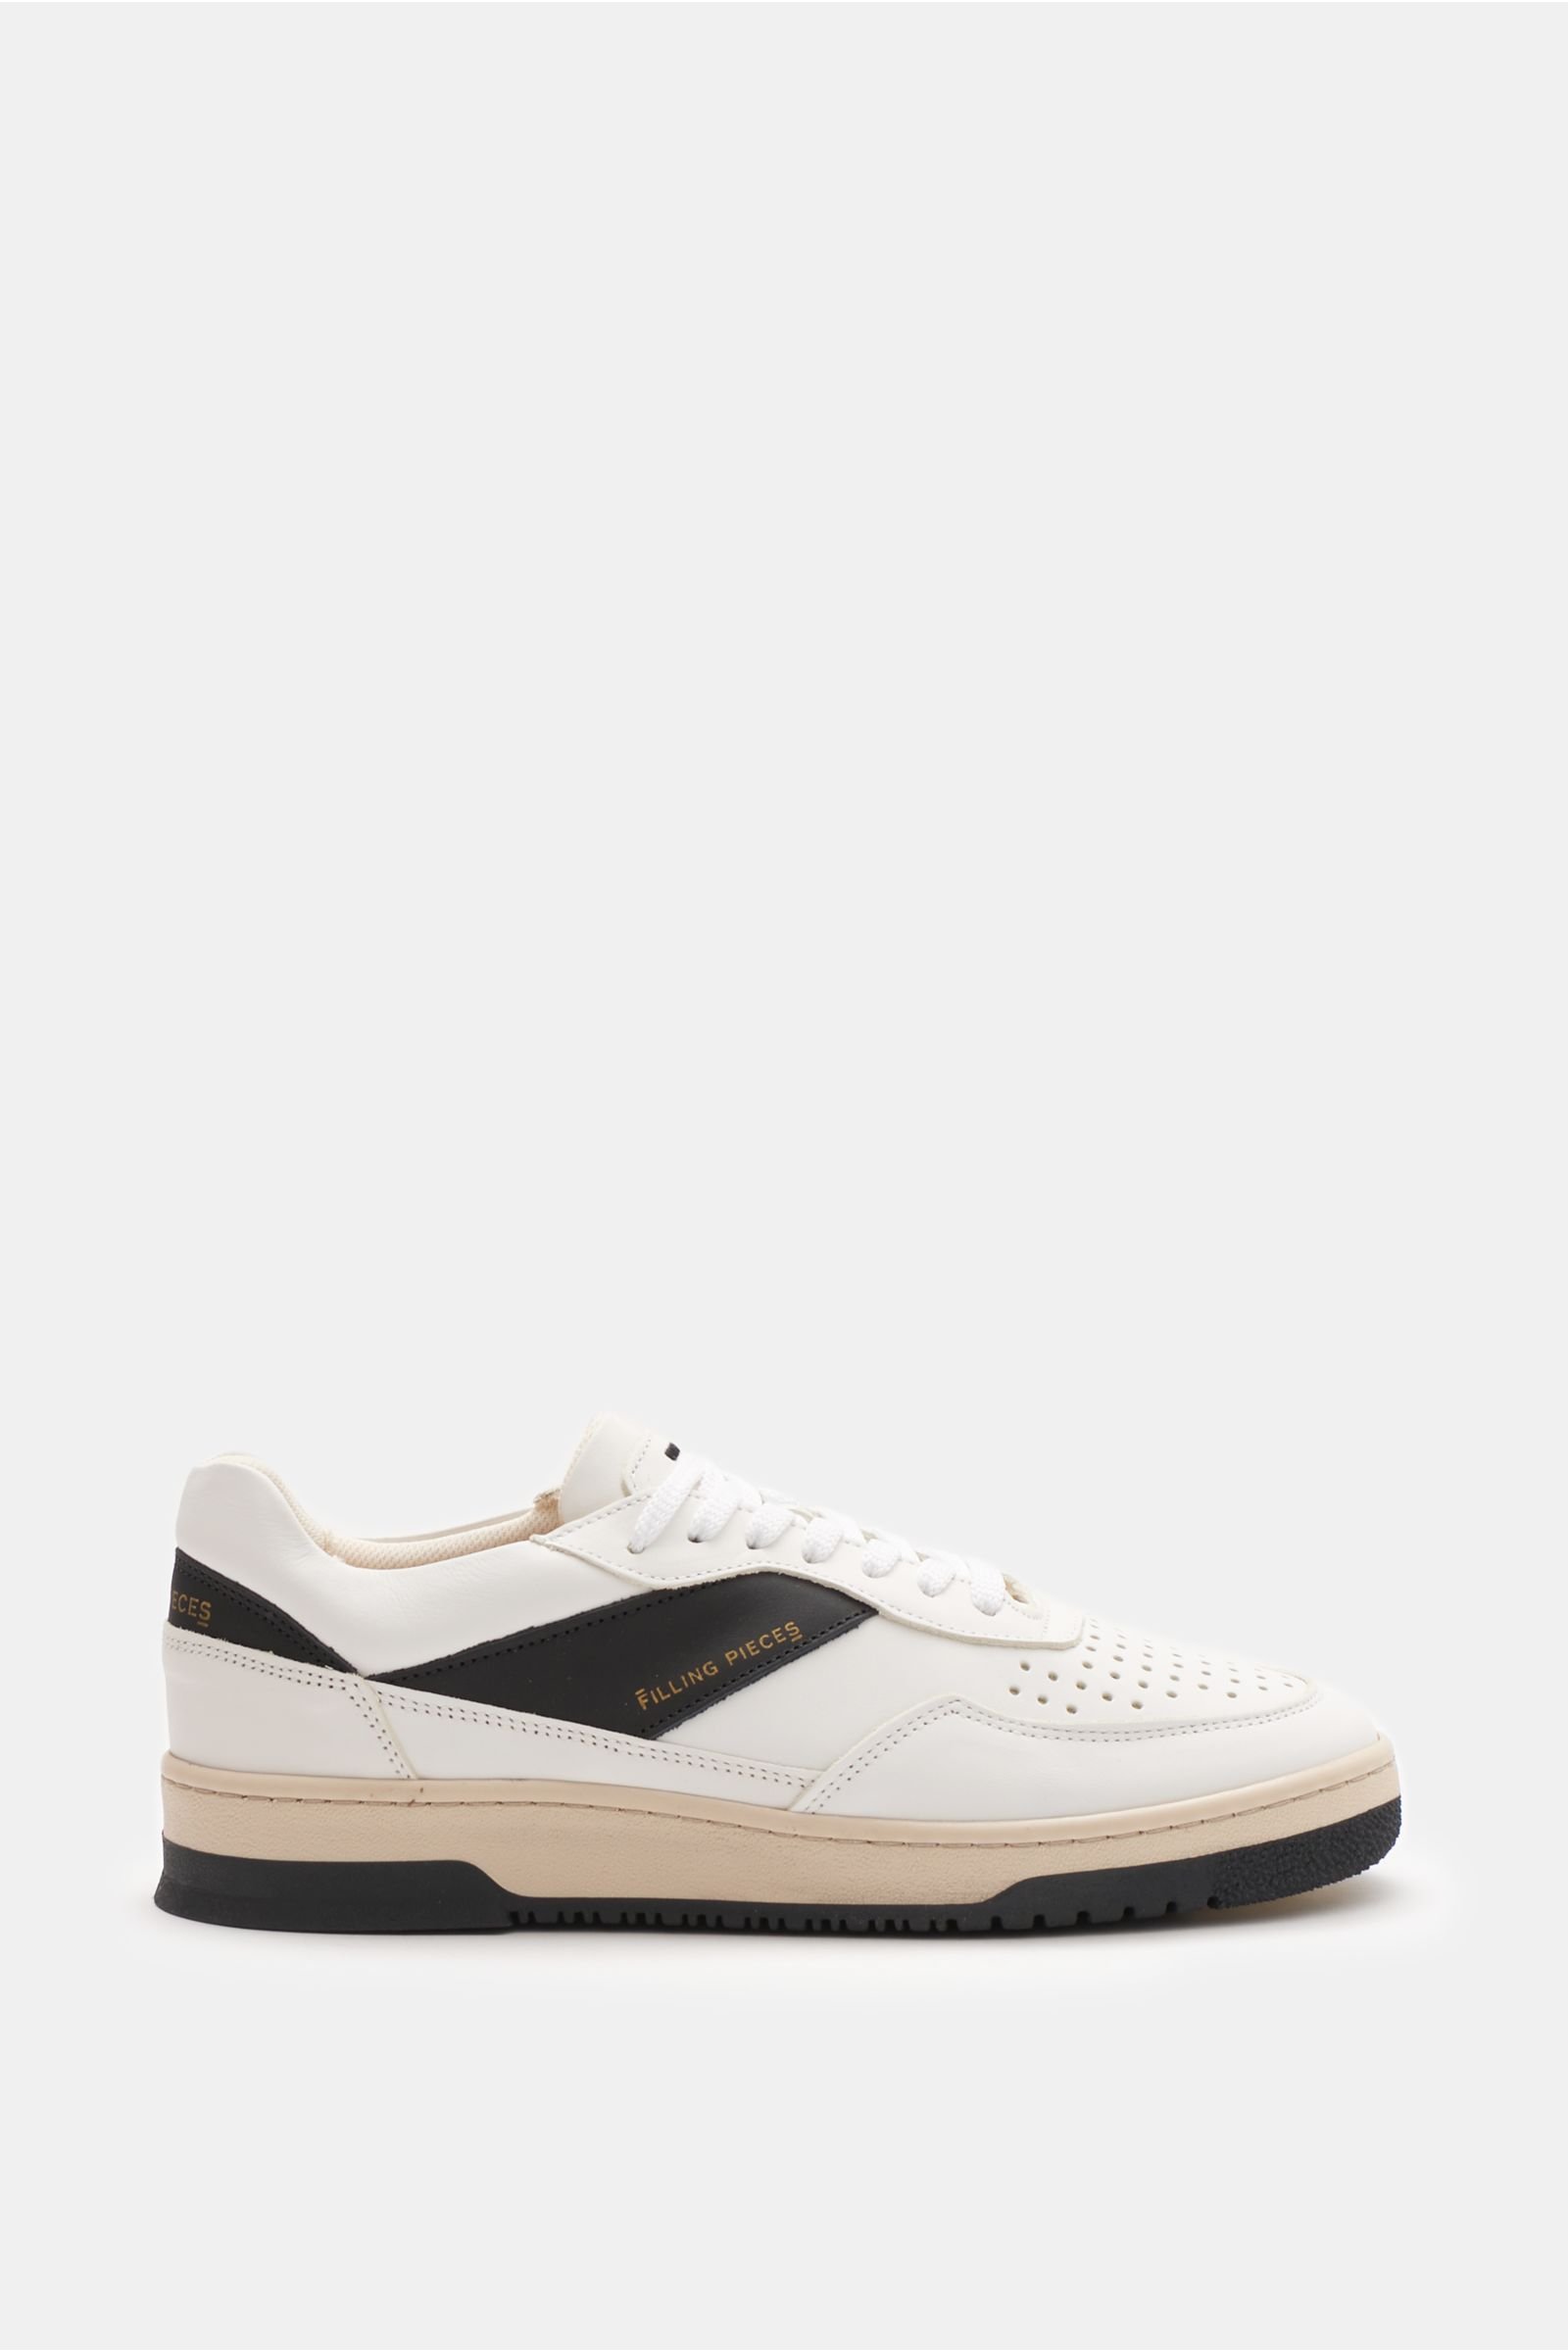 Sneakers 'Ace Spin Organic' off-white/black